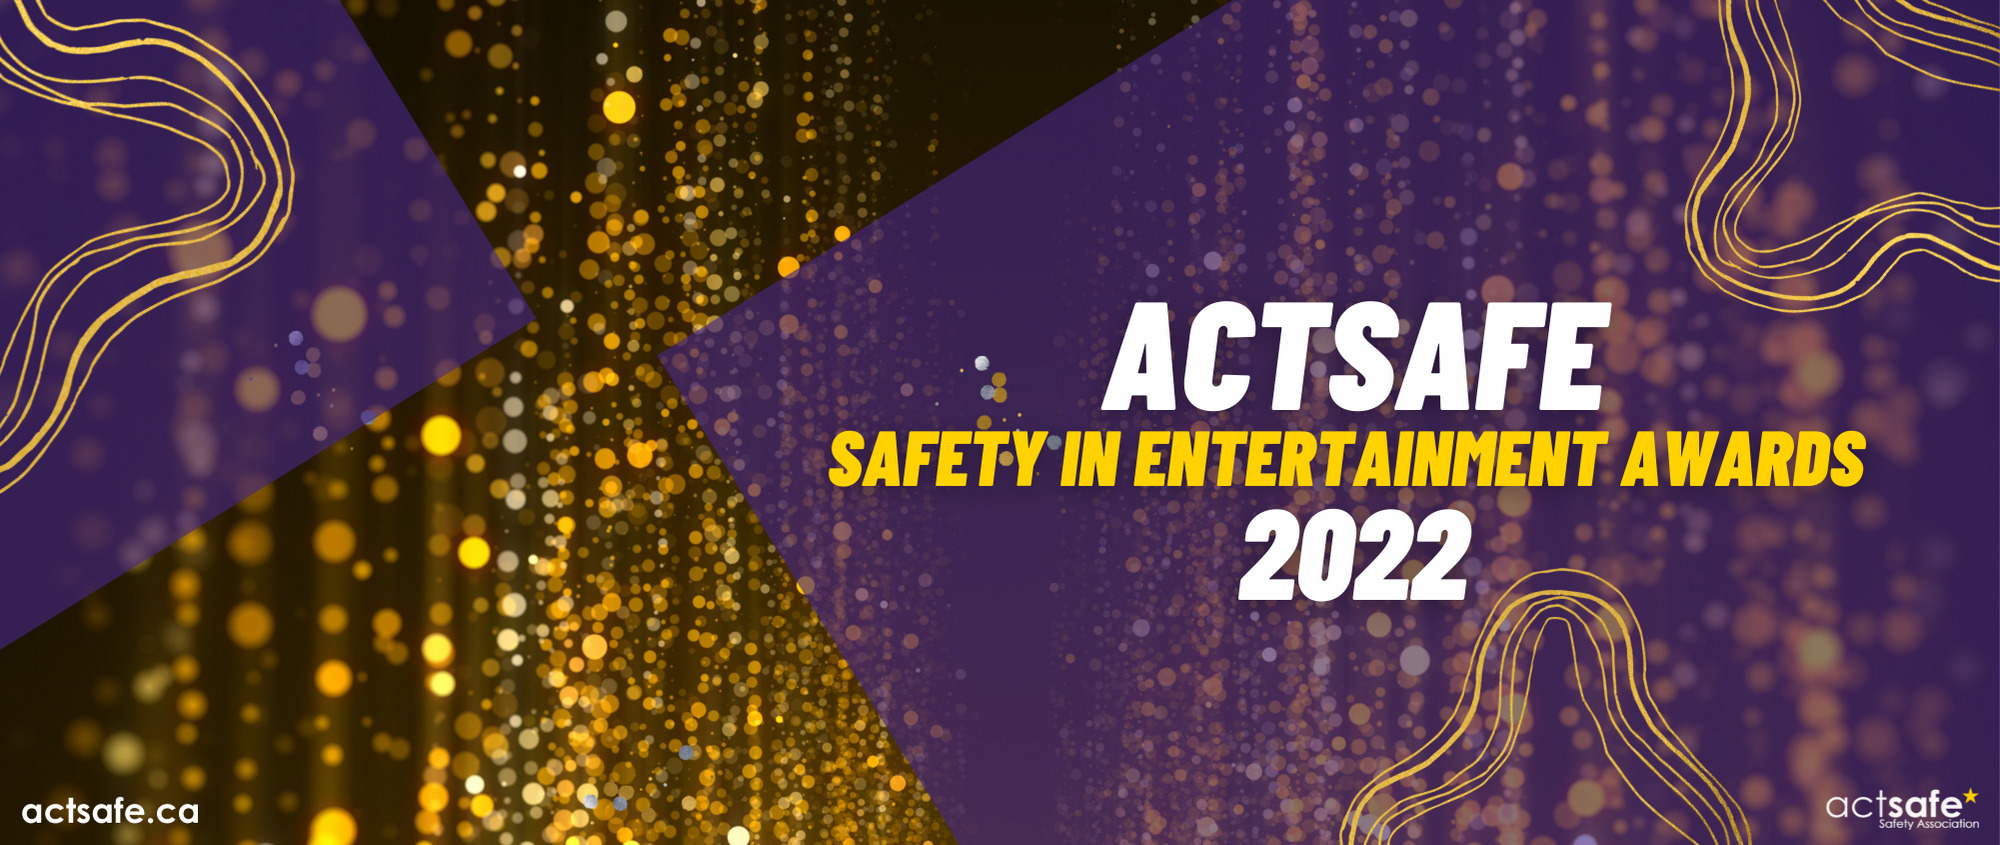 actsafe safety entertainment awards 2022 banner